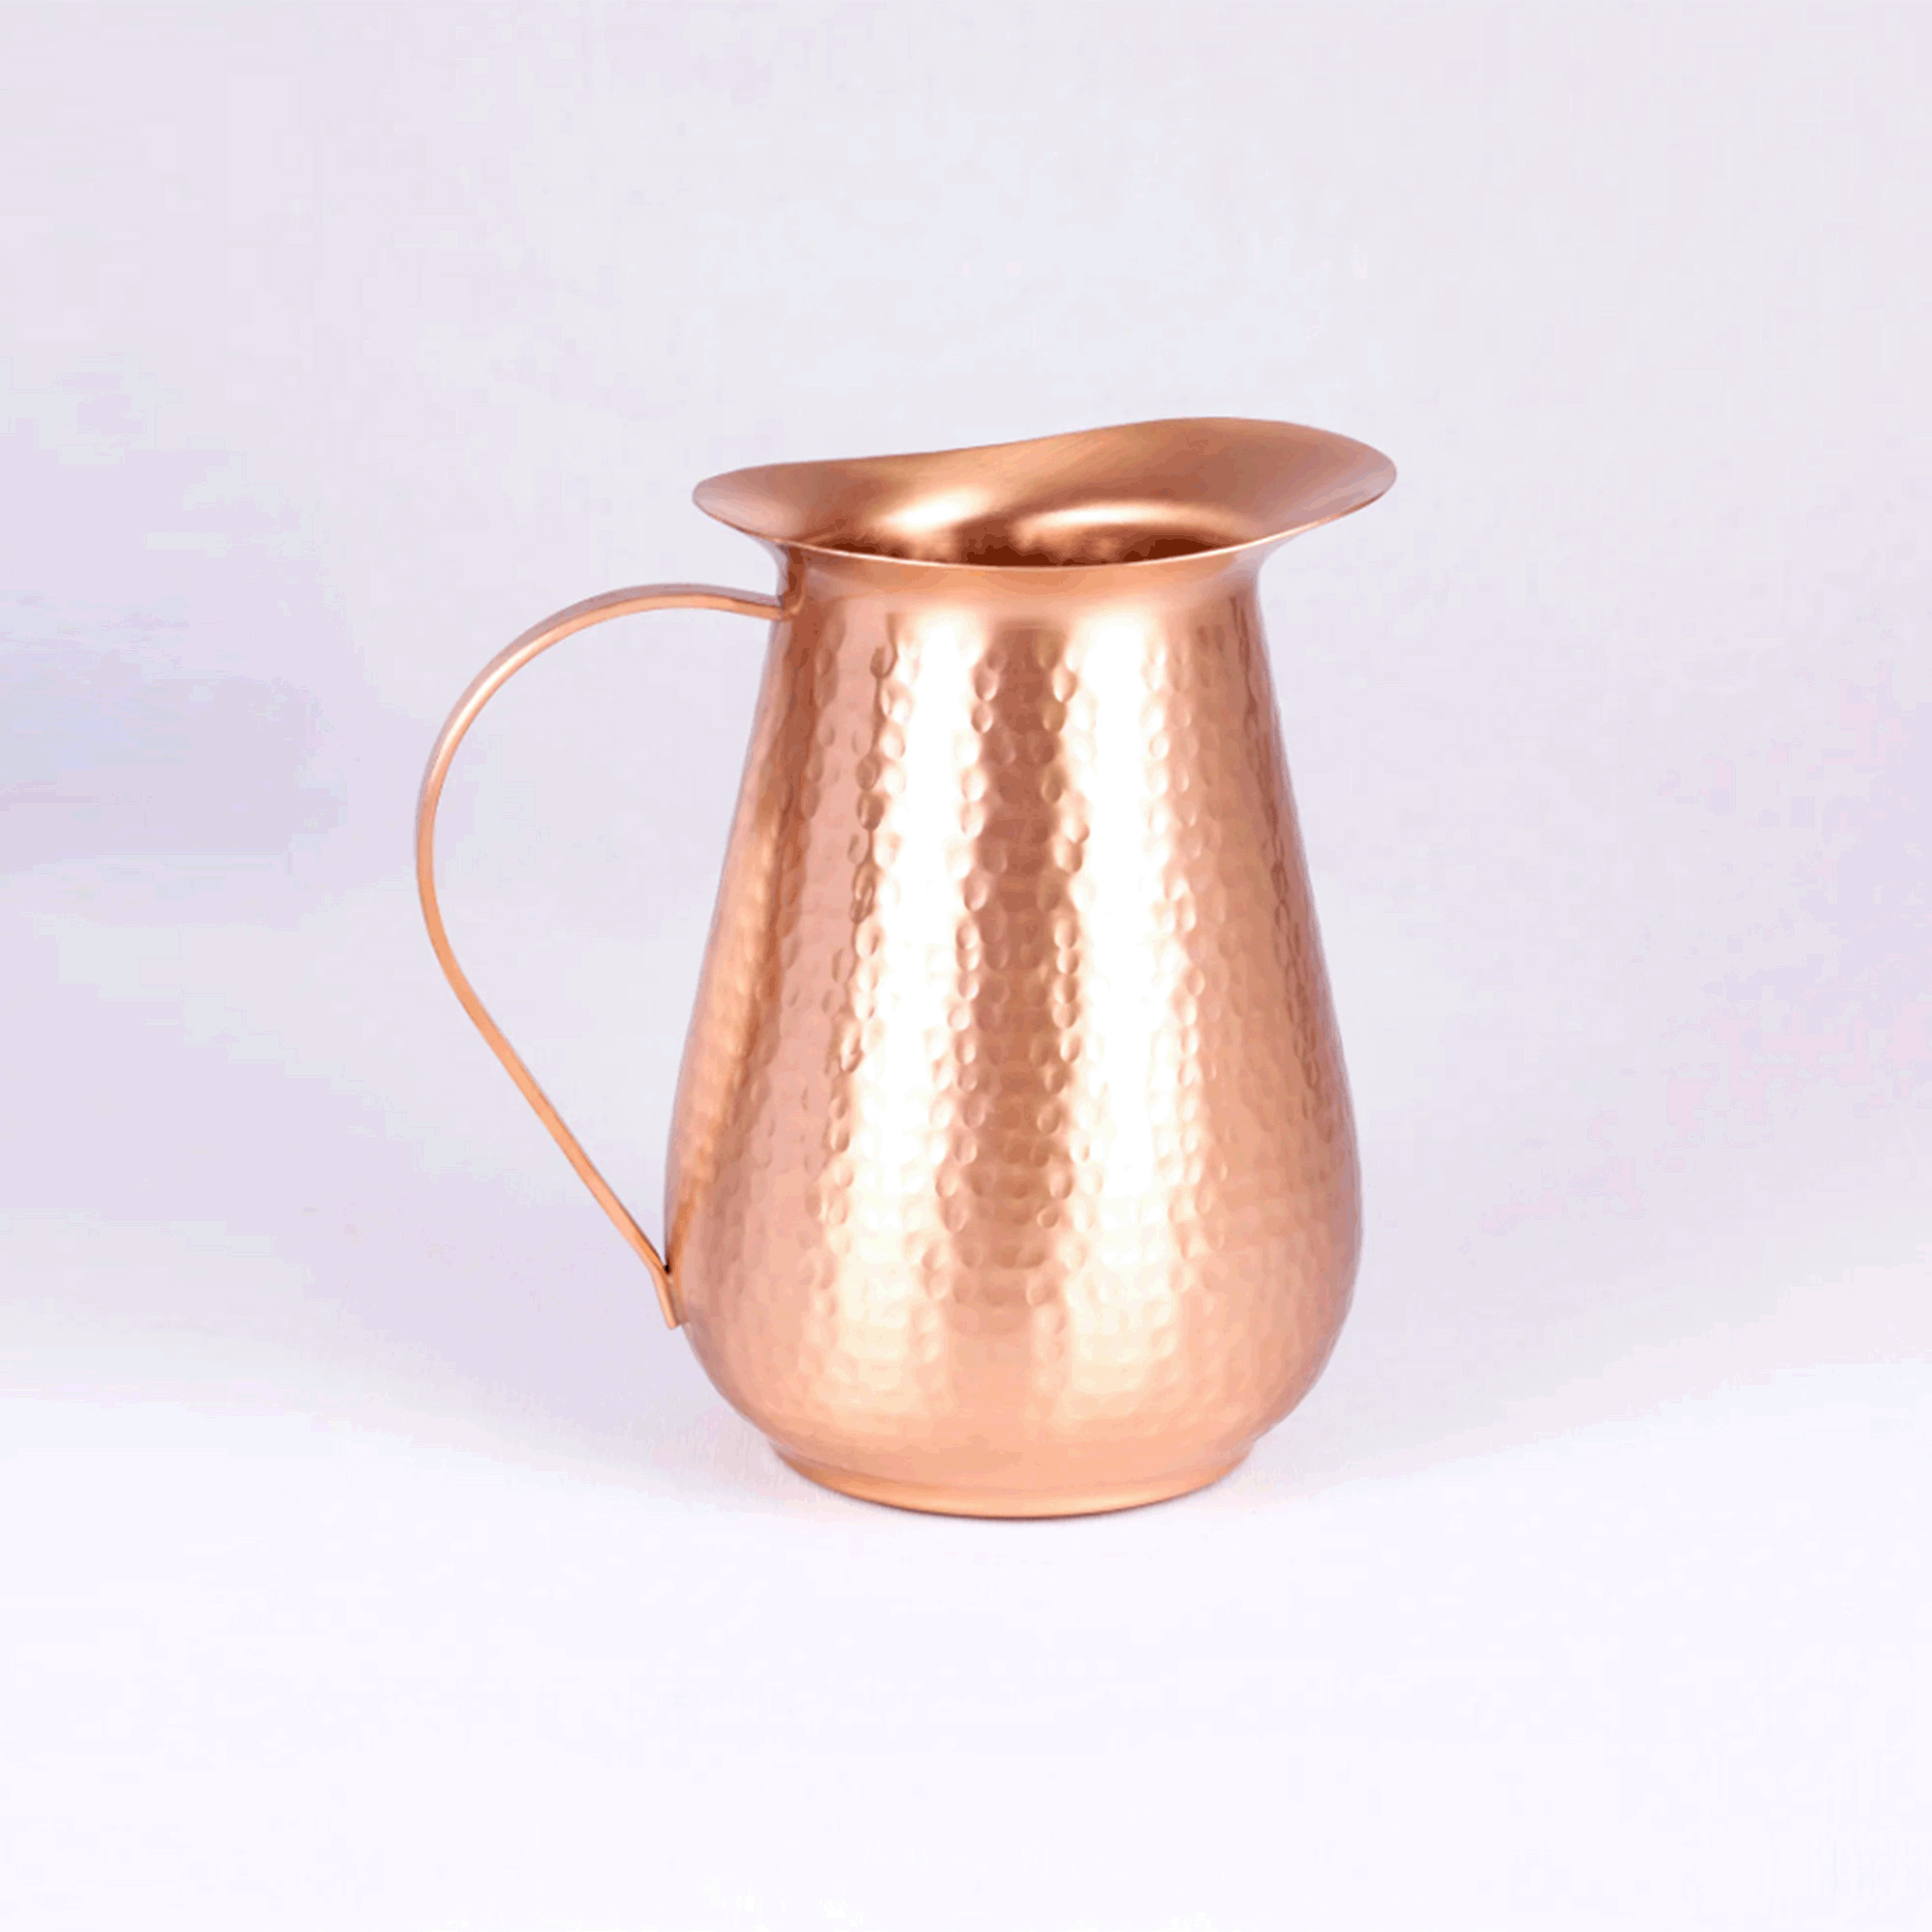 pure copper water jug with hammered design.